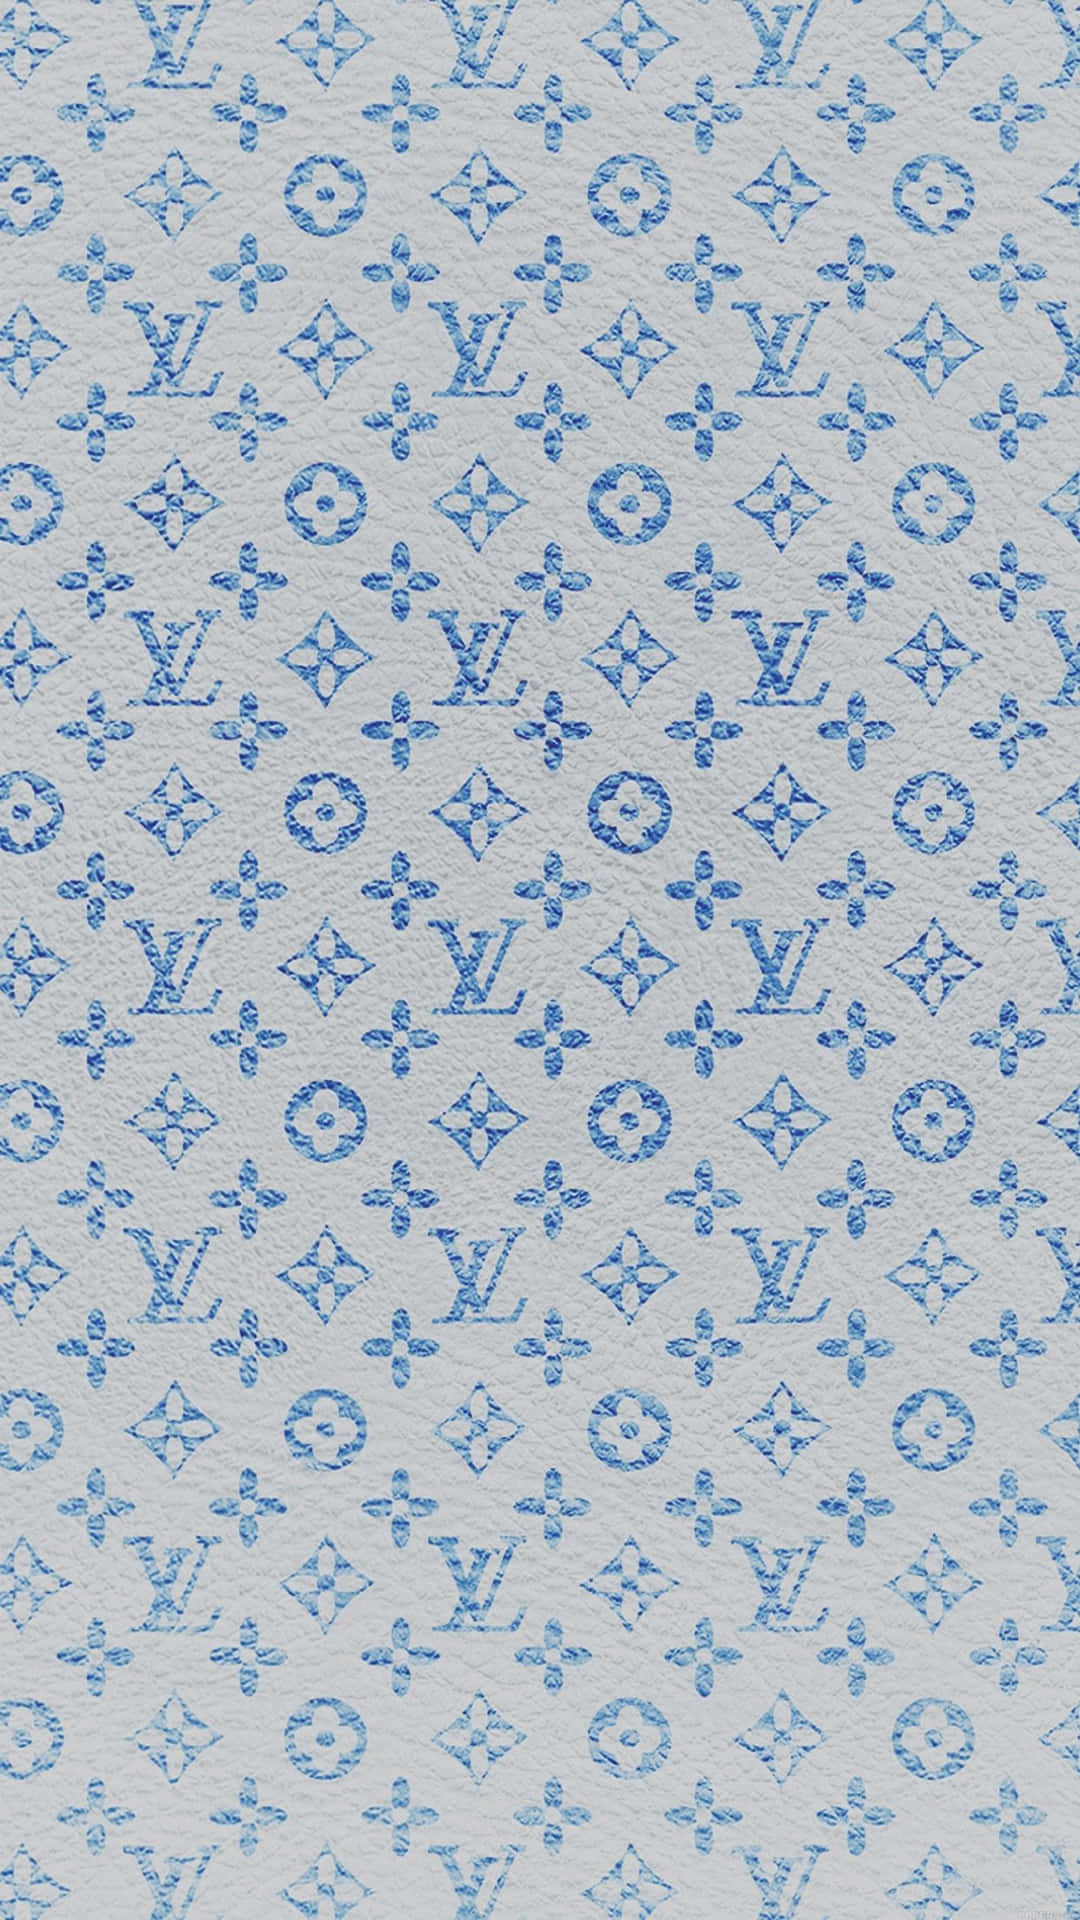 Look stylish in Louis Vuitton's classic blue Wallpaper